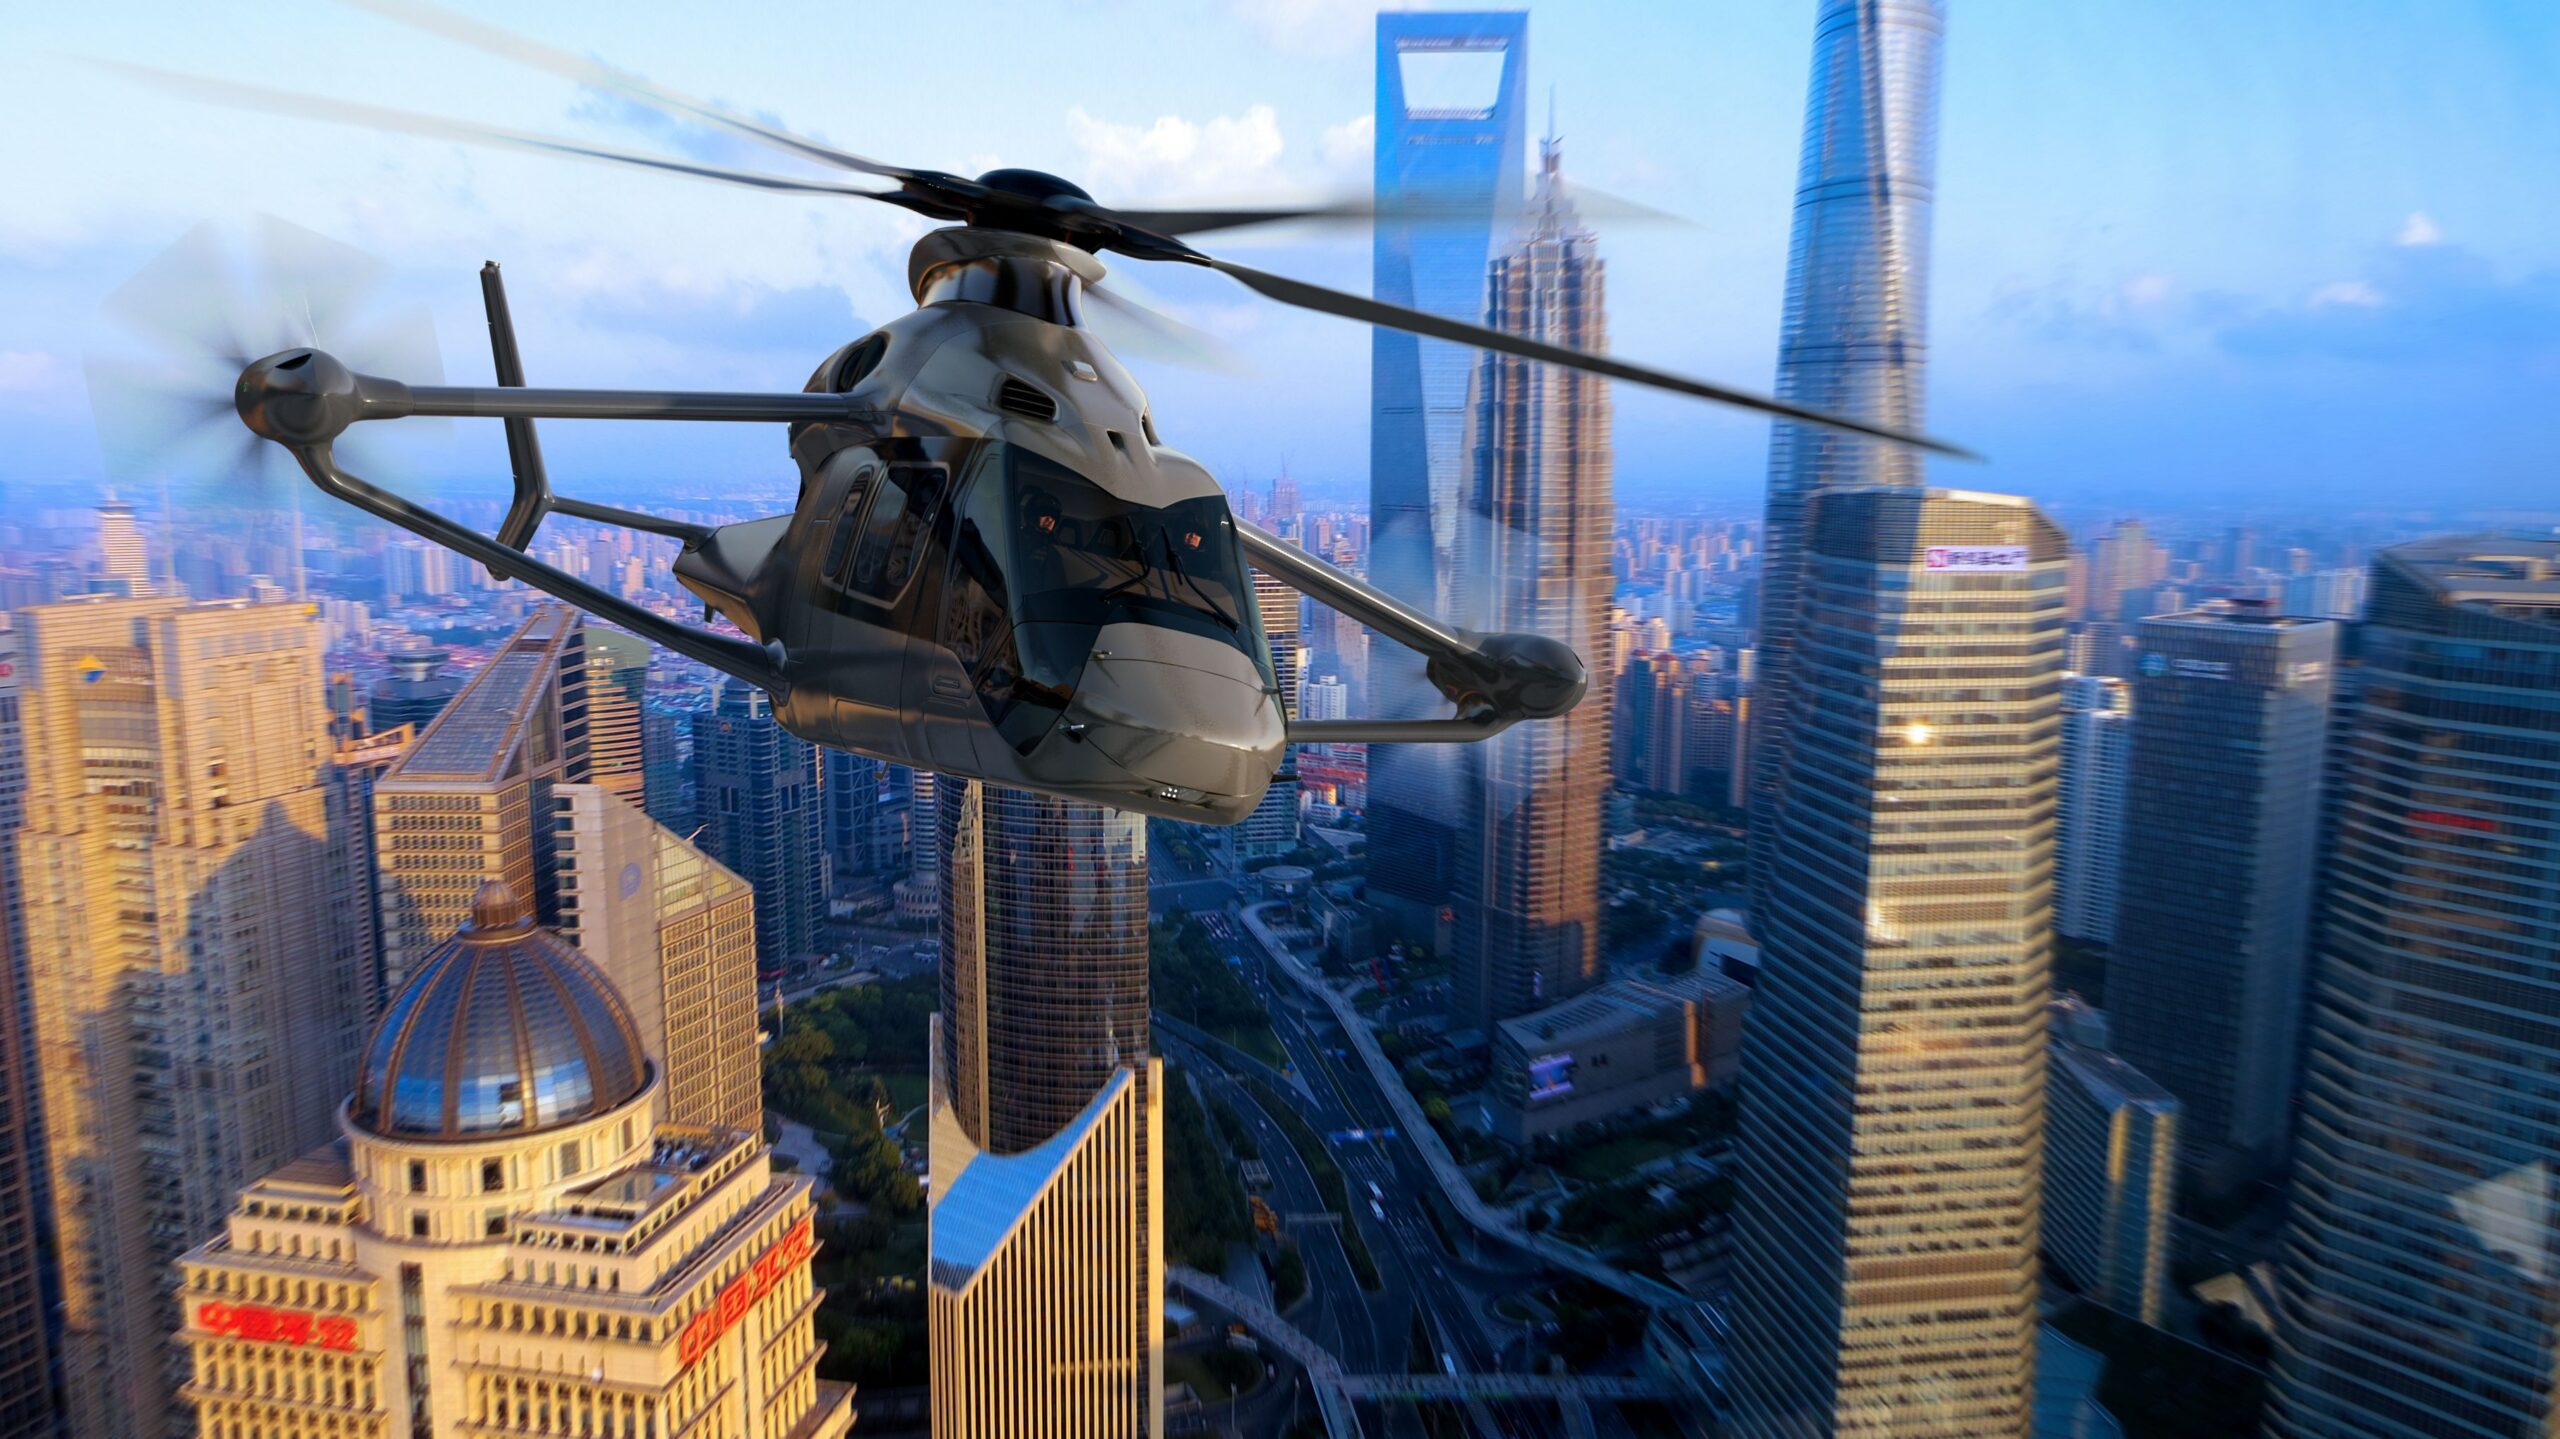 Airbus Racer helicopter depicted in flight